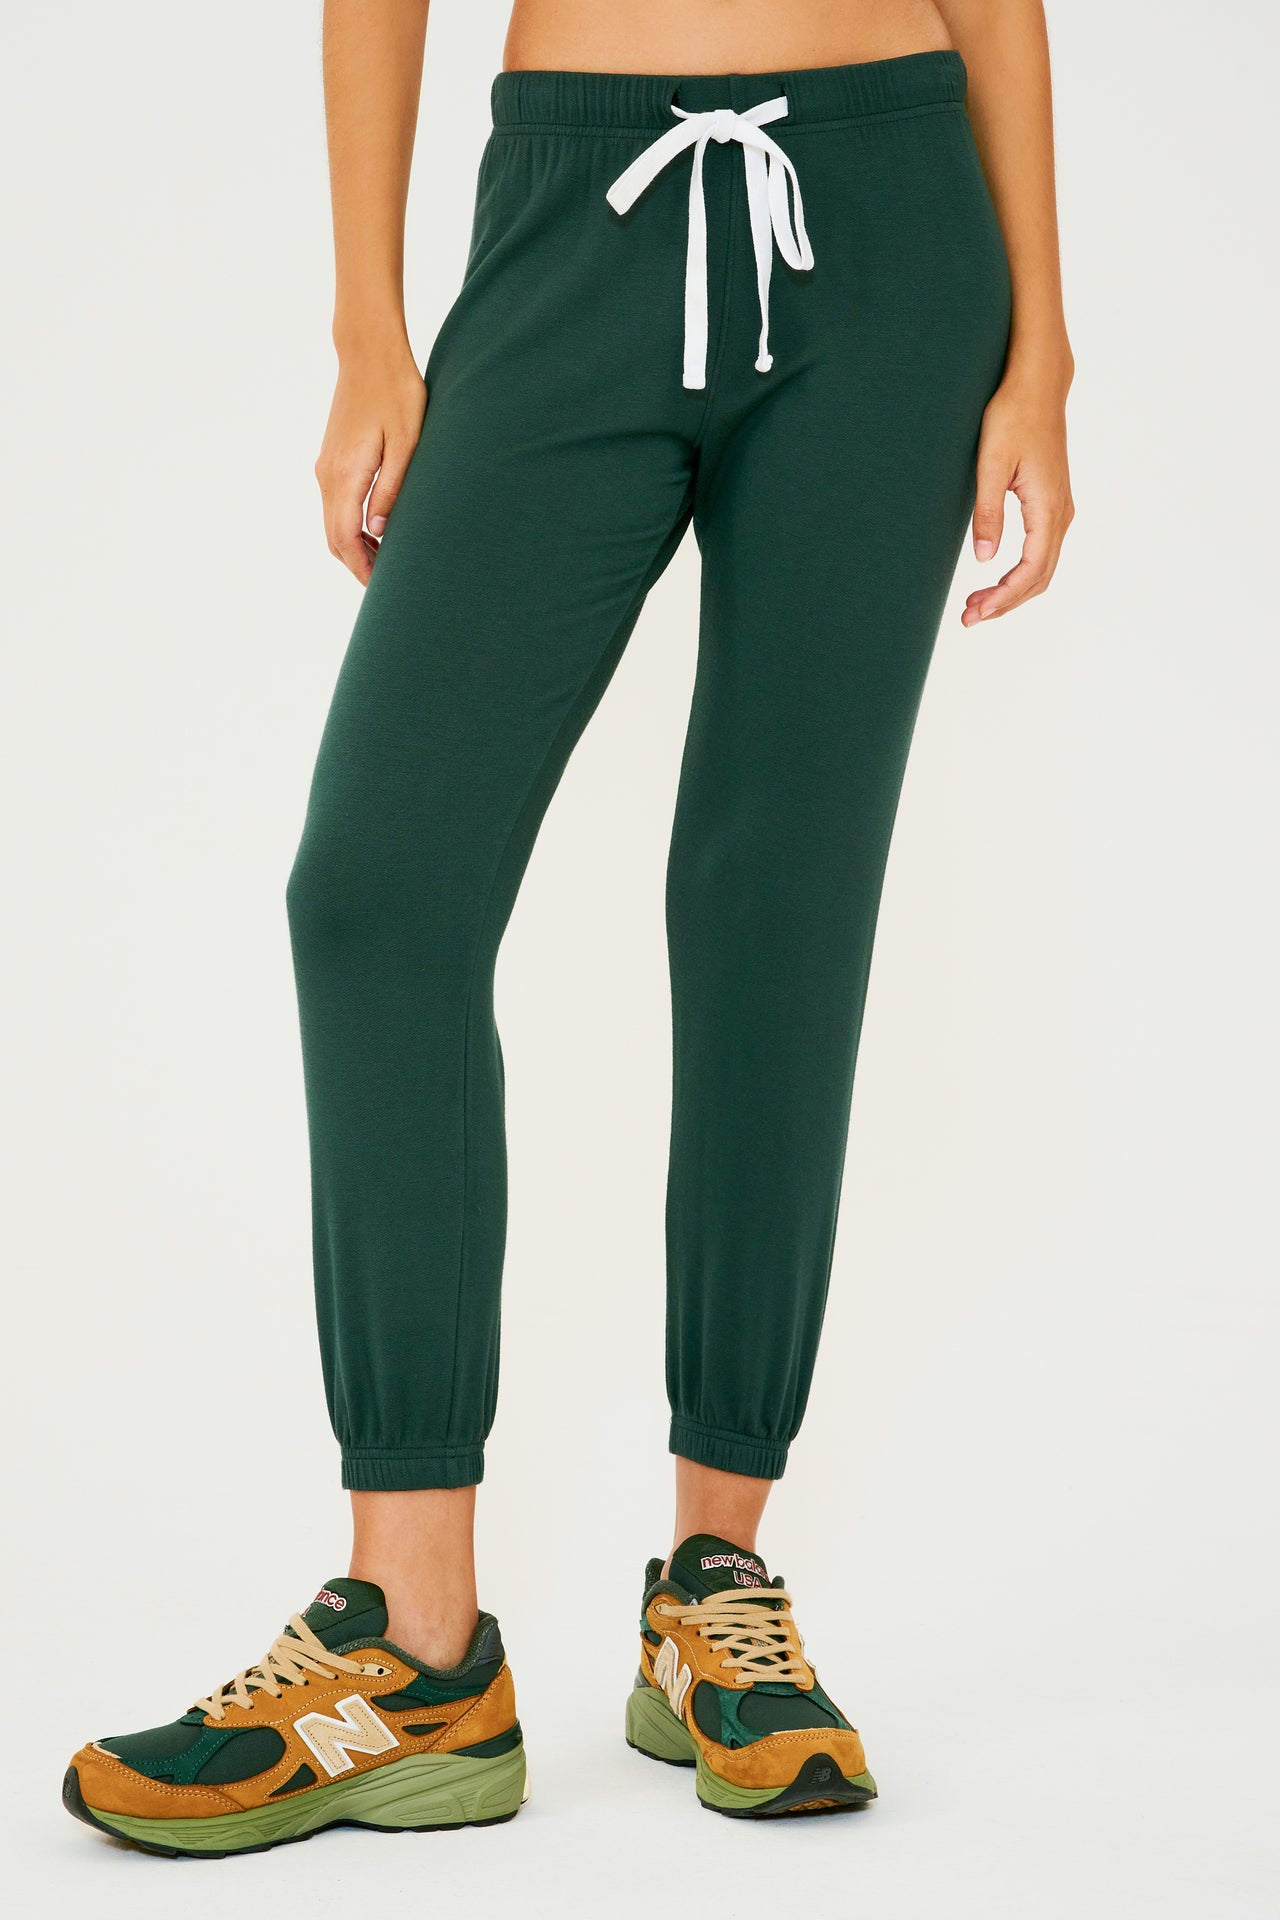 Front view of woman wearing dark green sweatpant jogger paired with dark green, orange and light green shoes